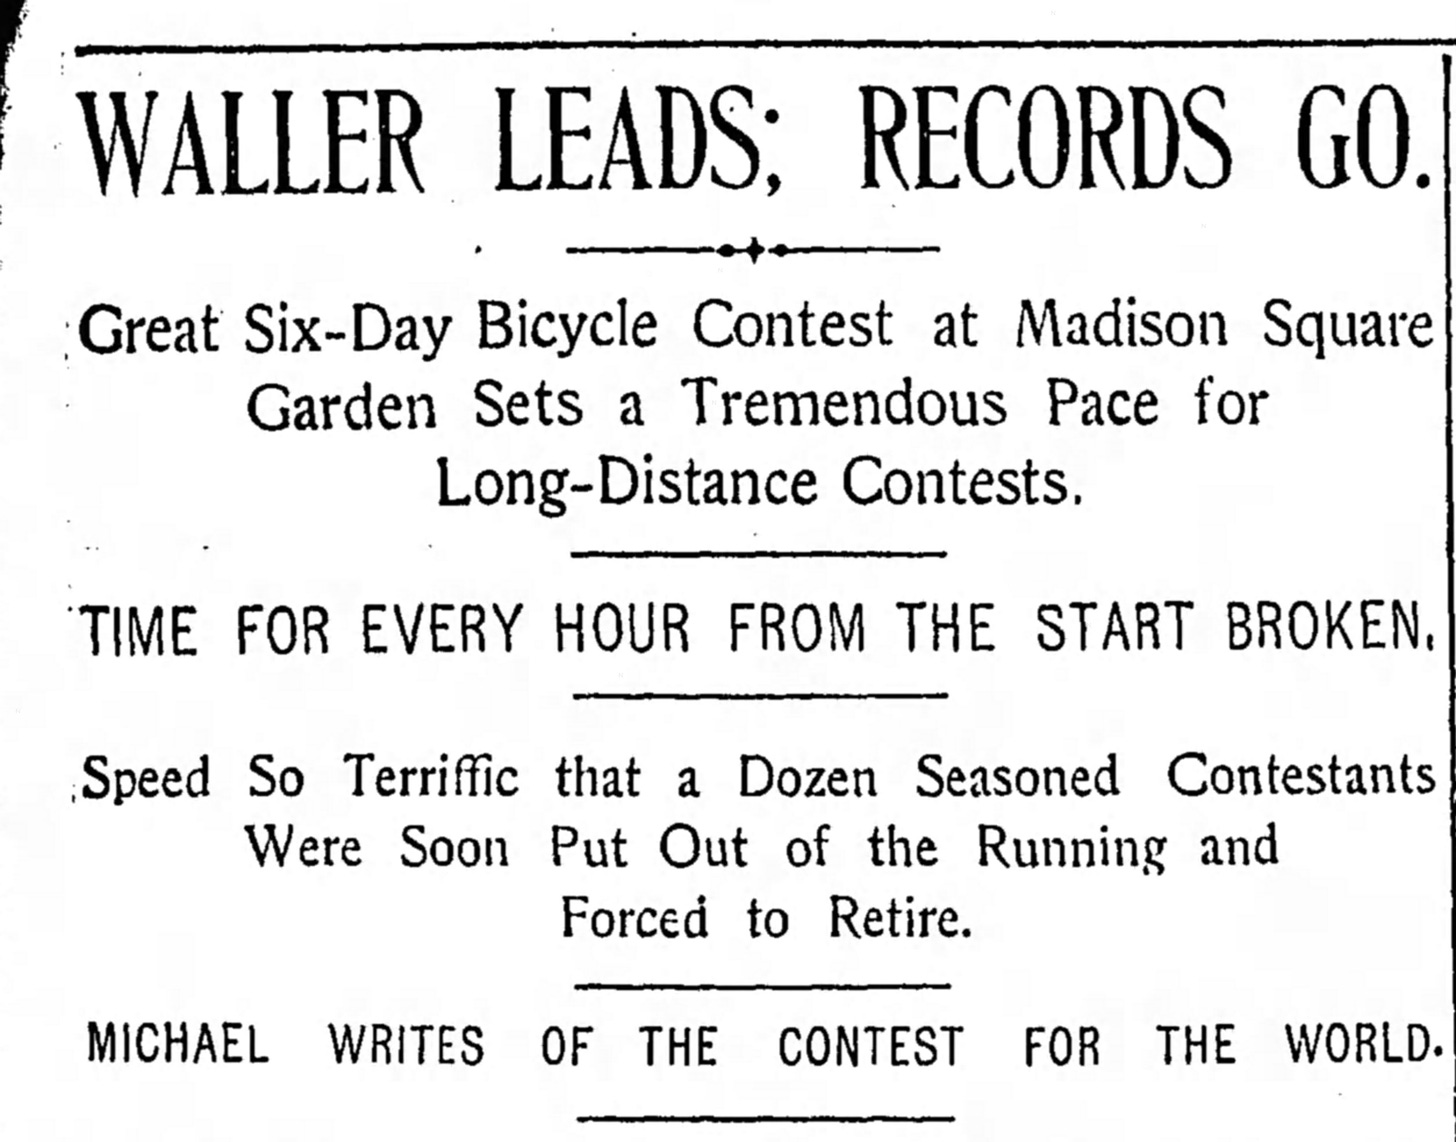 Headline from New York City newspaper The World, Dec 7, 1897 WALLER LEADS; RECORDS GO. Great Six-Day Bicycle Contest at Madison Square Garden Sets a Tremendous Pace for Long-Distance Contests TIME FOR EVERY HOUR FROM THE START BROKEN. Speed So Terriffic that a Dozen Seasoned Contestants Were Soon Put Out of the Running and Forced to Retire. MICHAEL WRITES OF THE CONTEST FOR THE WORLD.